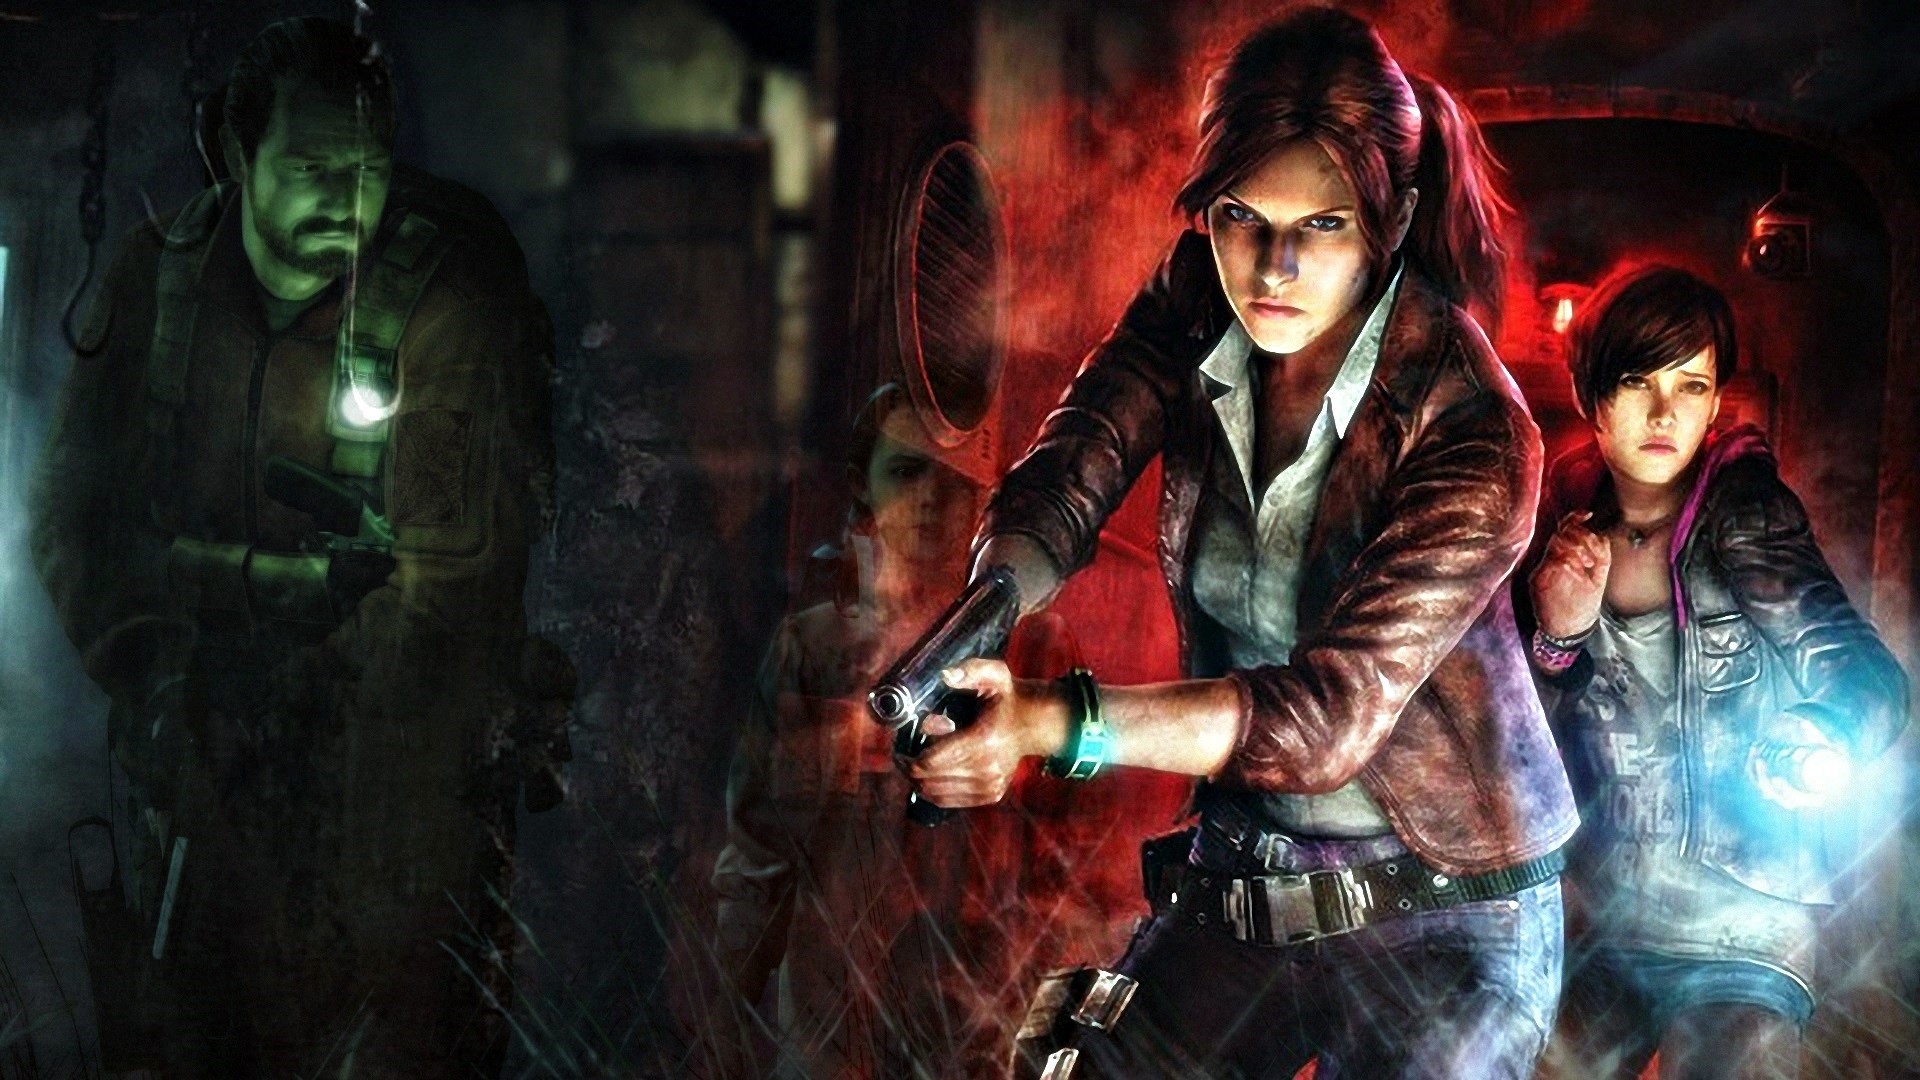 7 Resident Evil Revelations 2 HD Wallpapers Backgrounds – Wallpaper Abyss